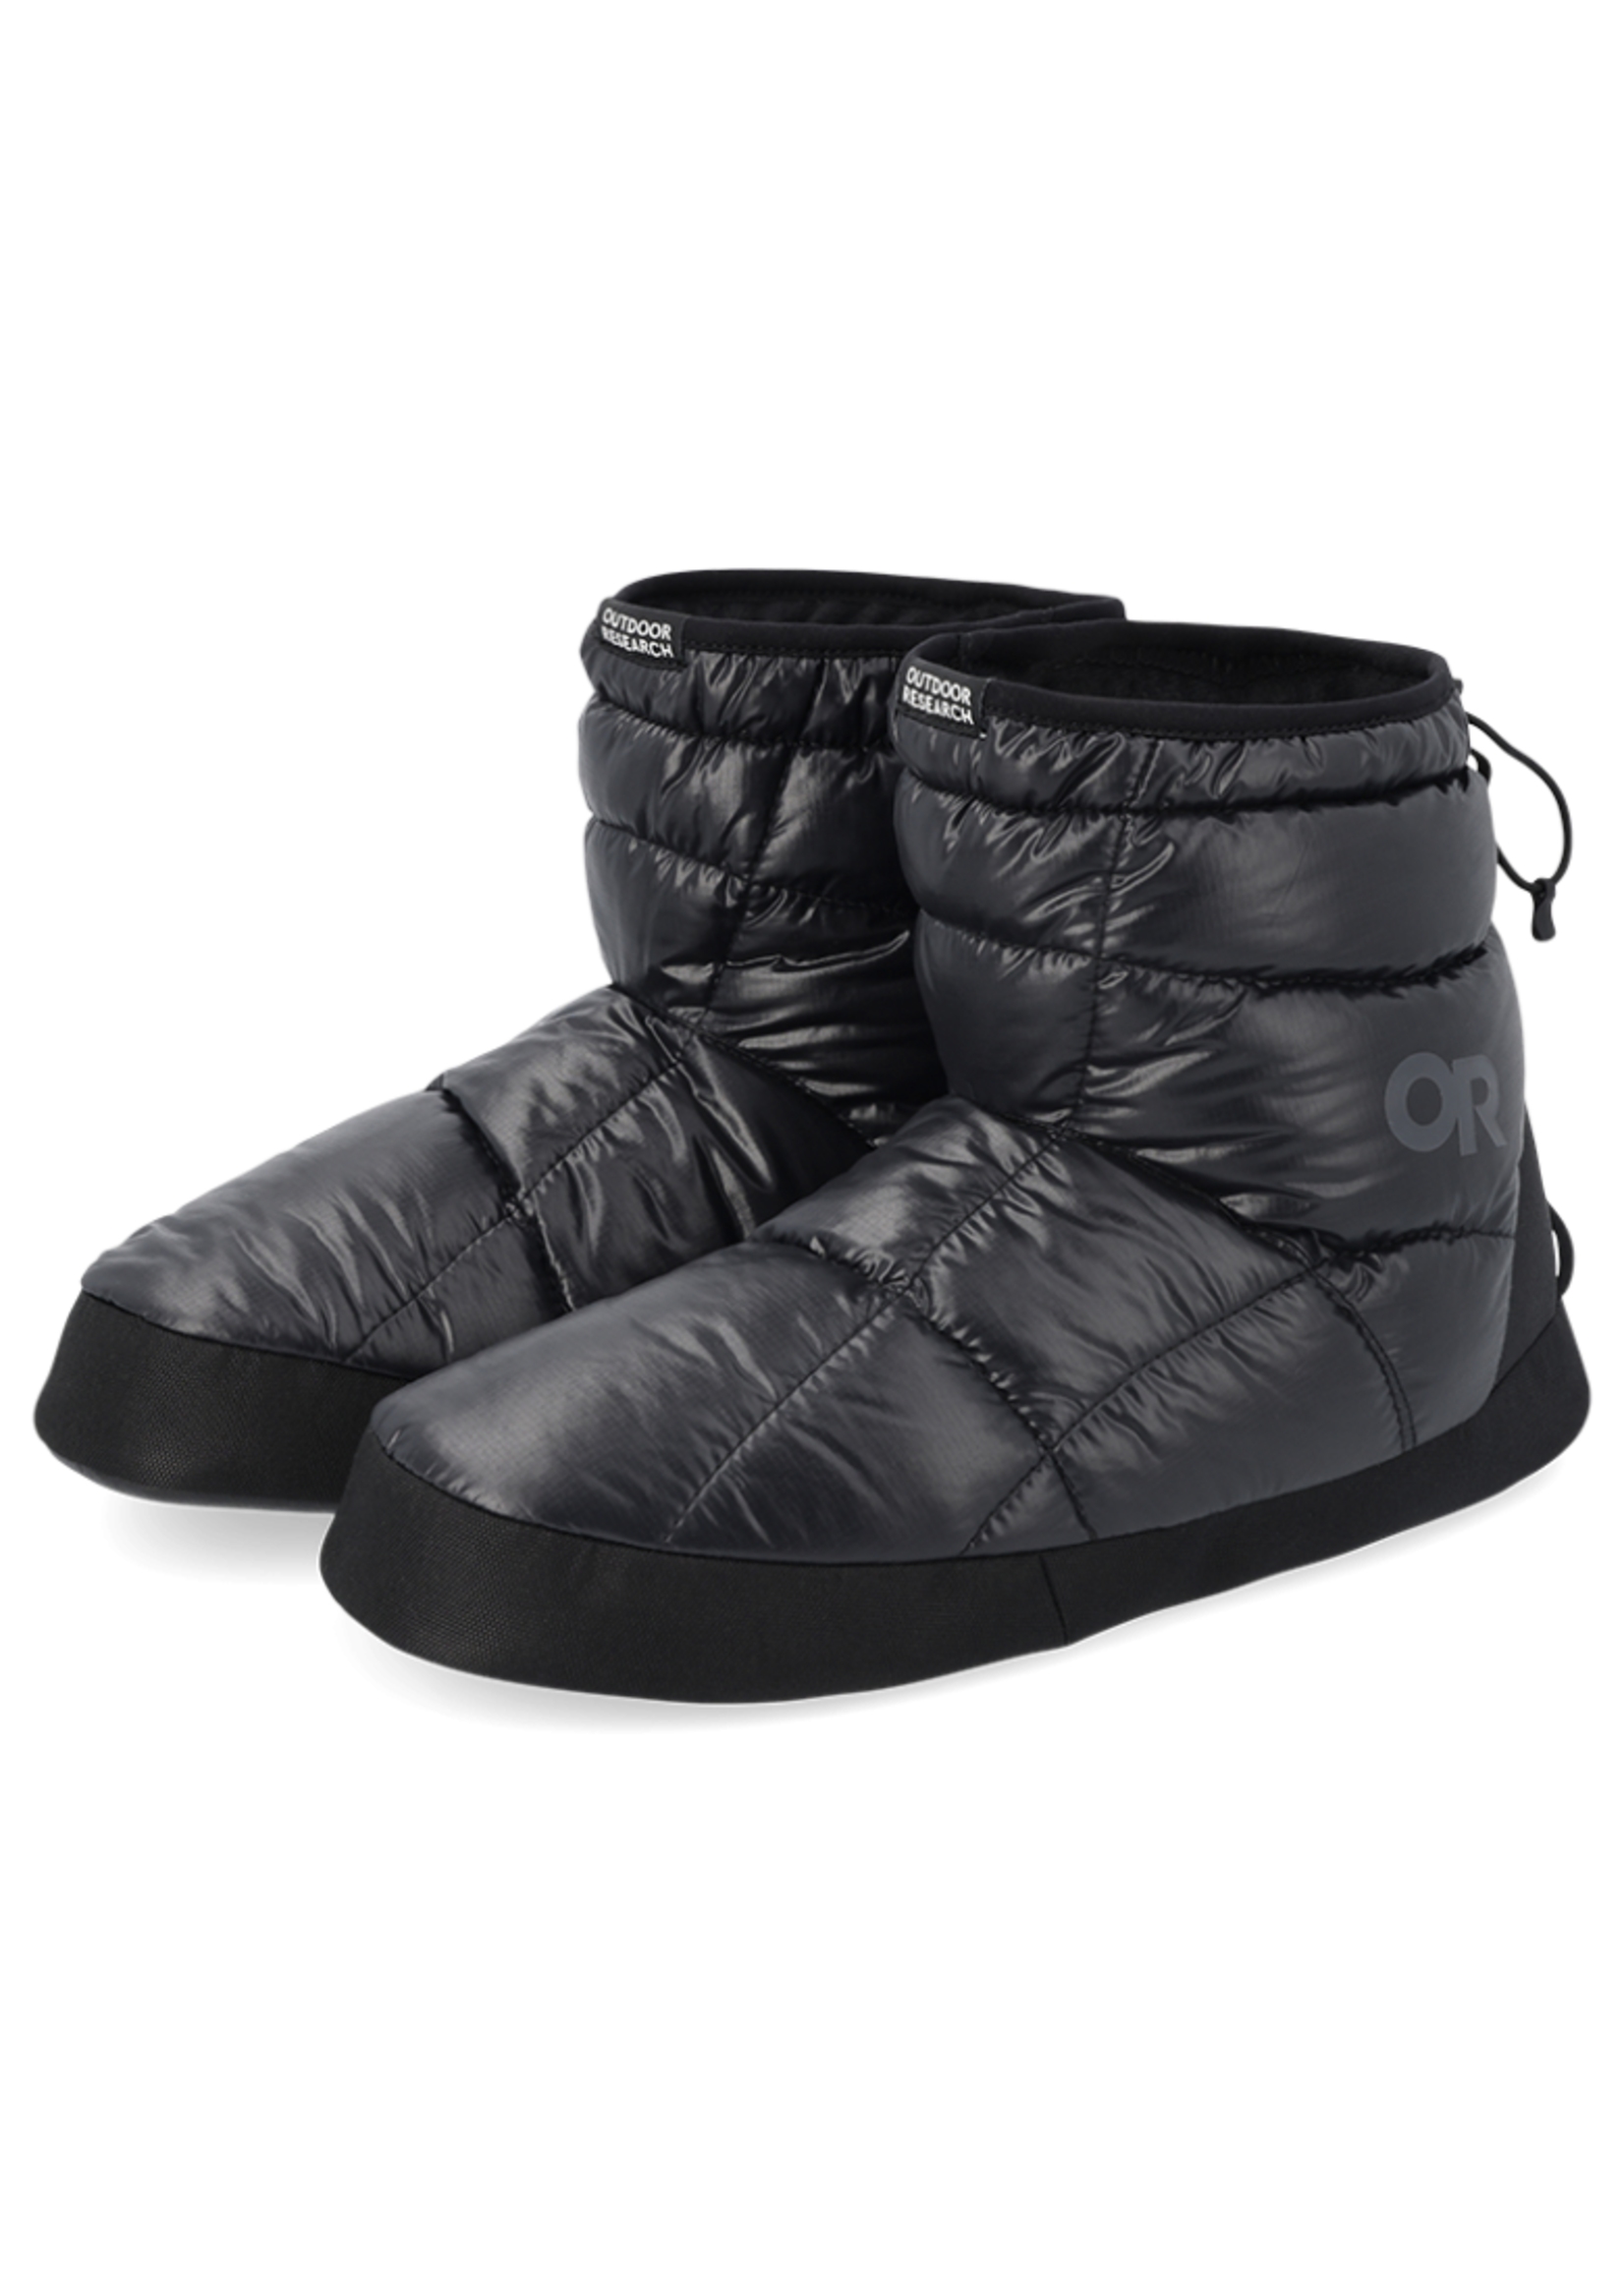 OUTDOOR RESEARCH Men's Tundra Airgel Base Camp Booties